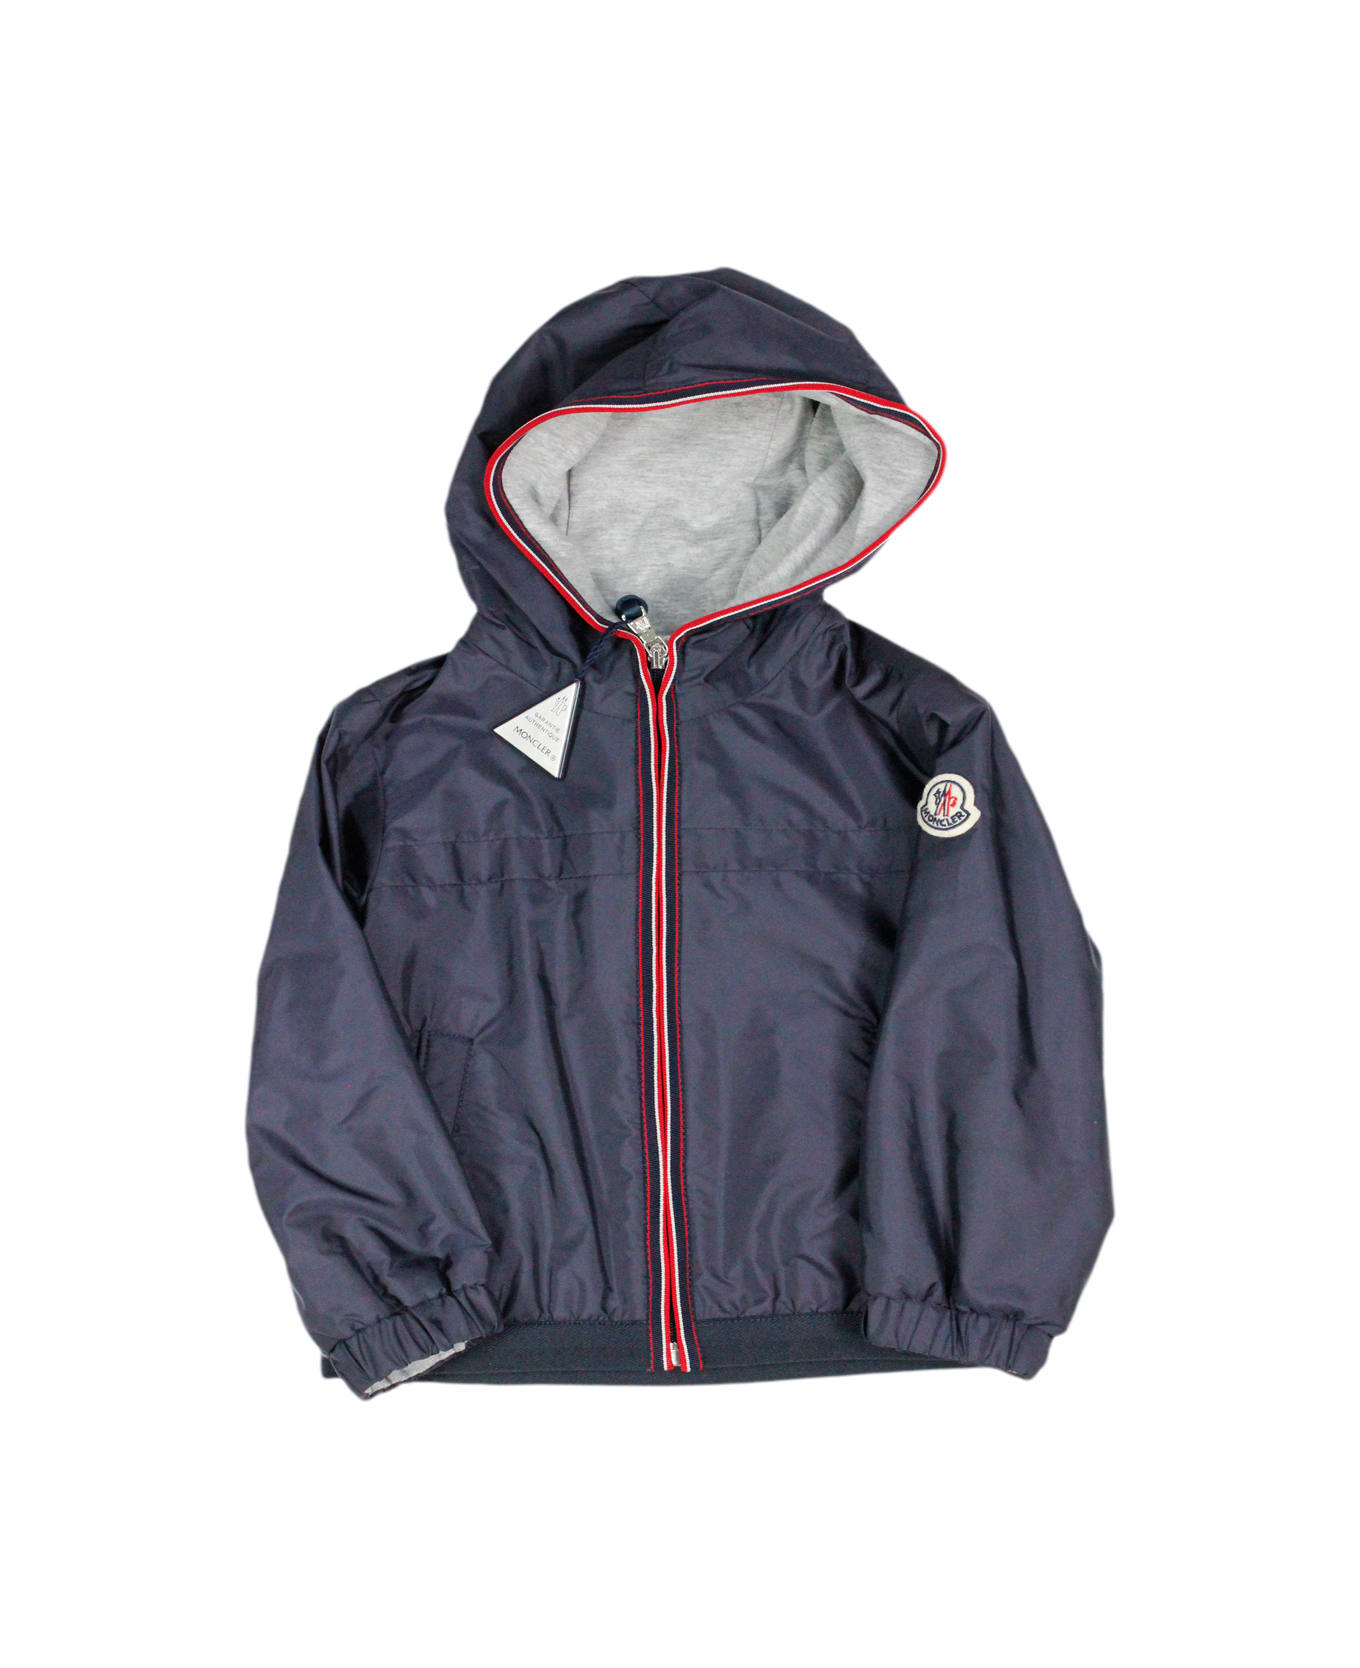 Moncler Windproof Jacket In Technical Fabric With Hood And Cotton Lining. Colored Profile On The Zip And Hood - Blu